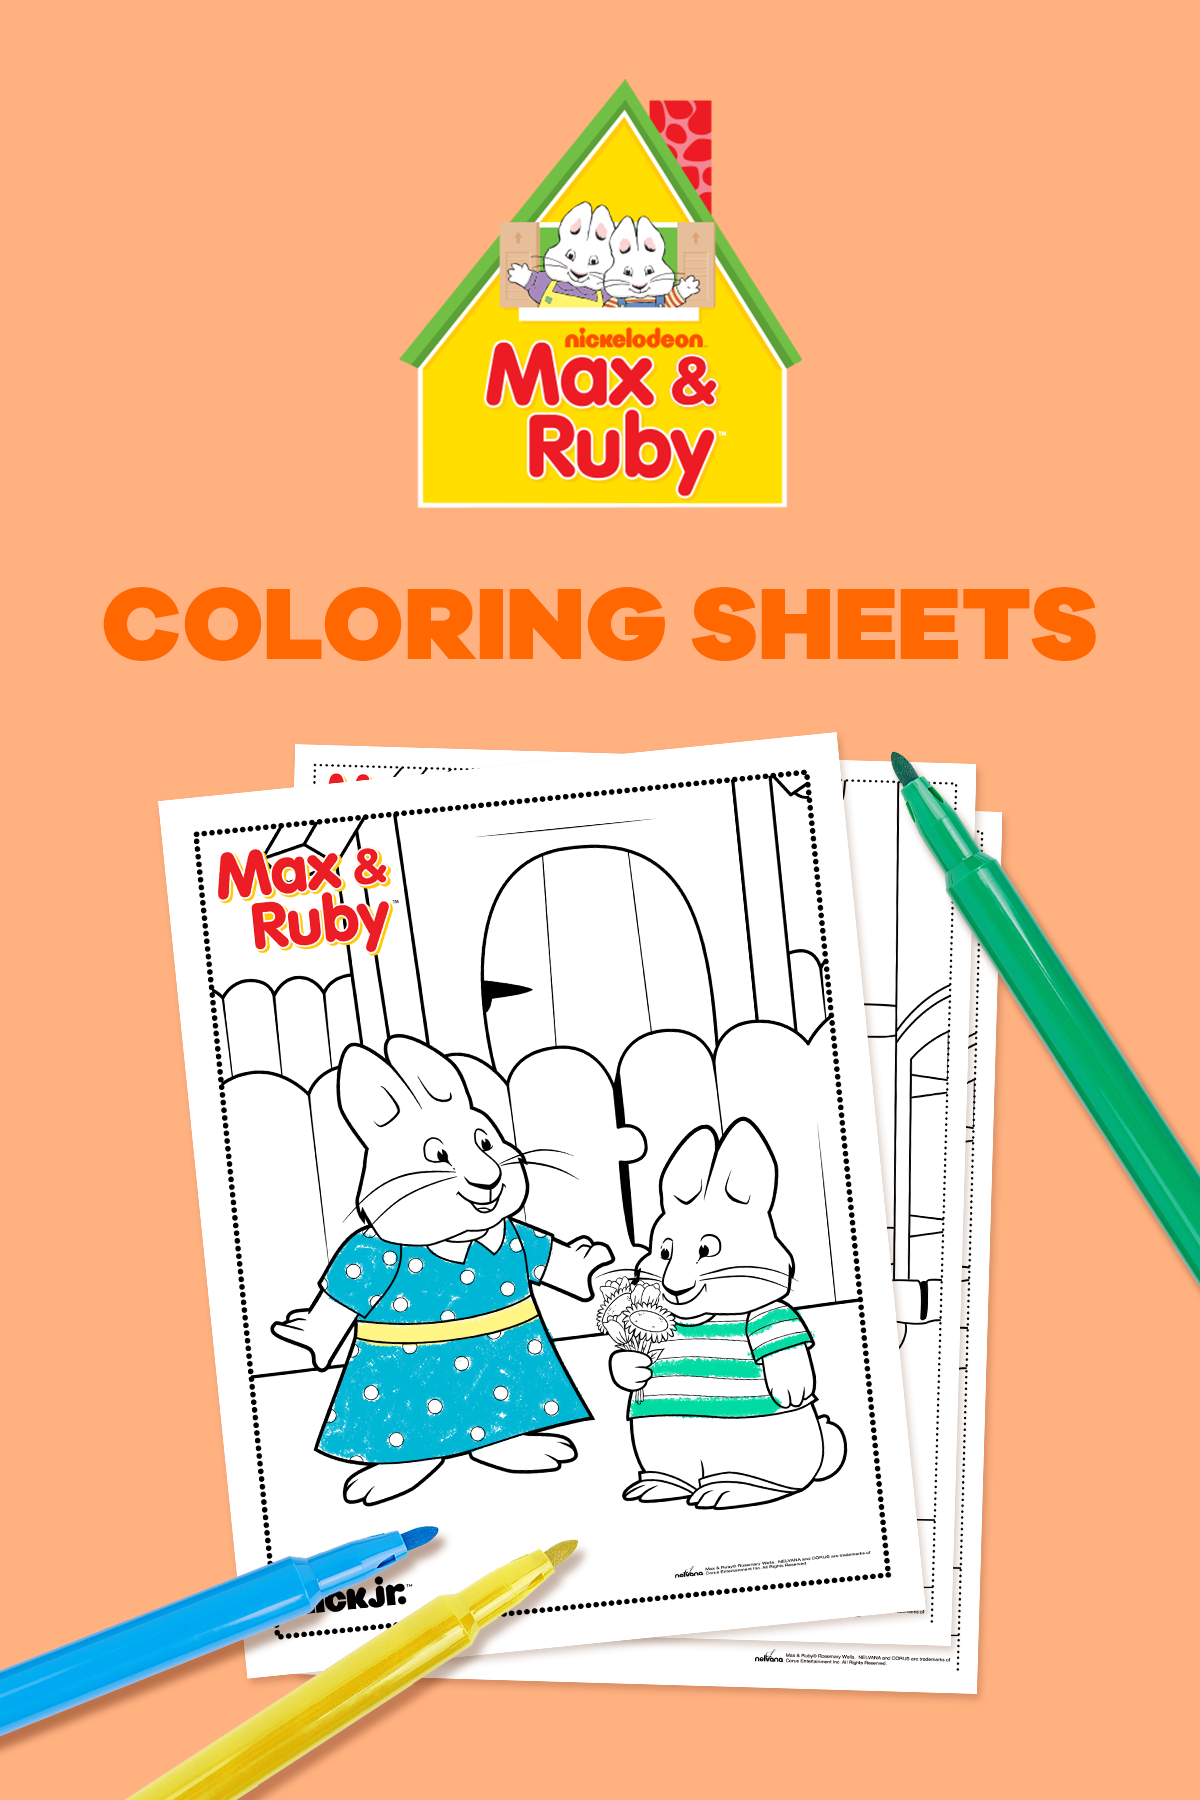 Max & Ruby Coloring Pages